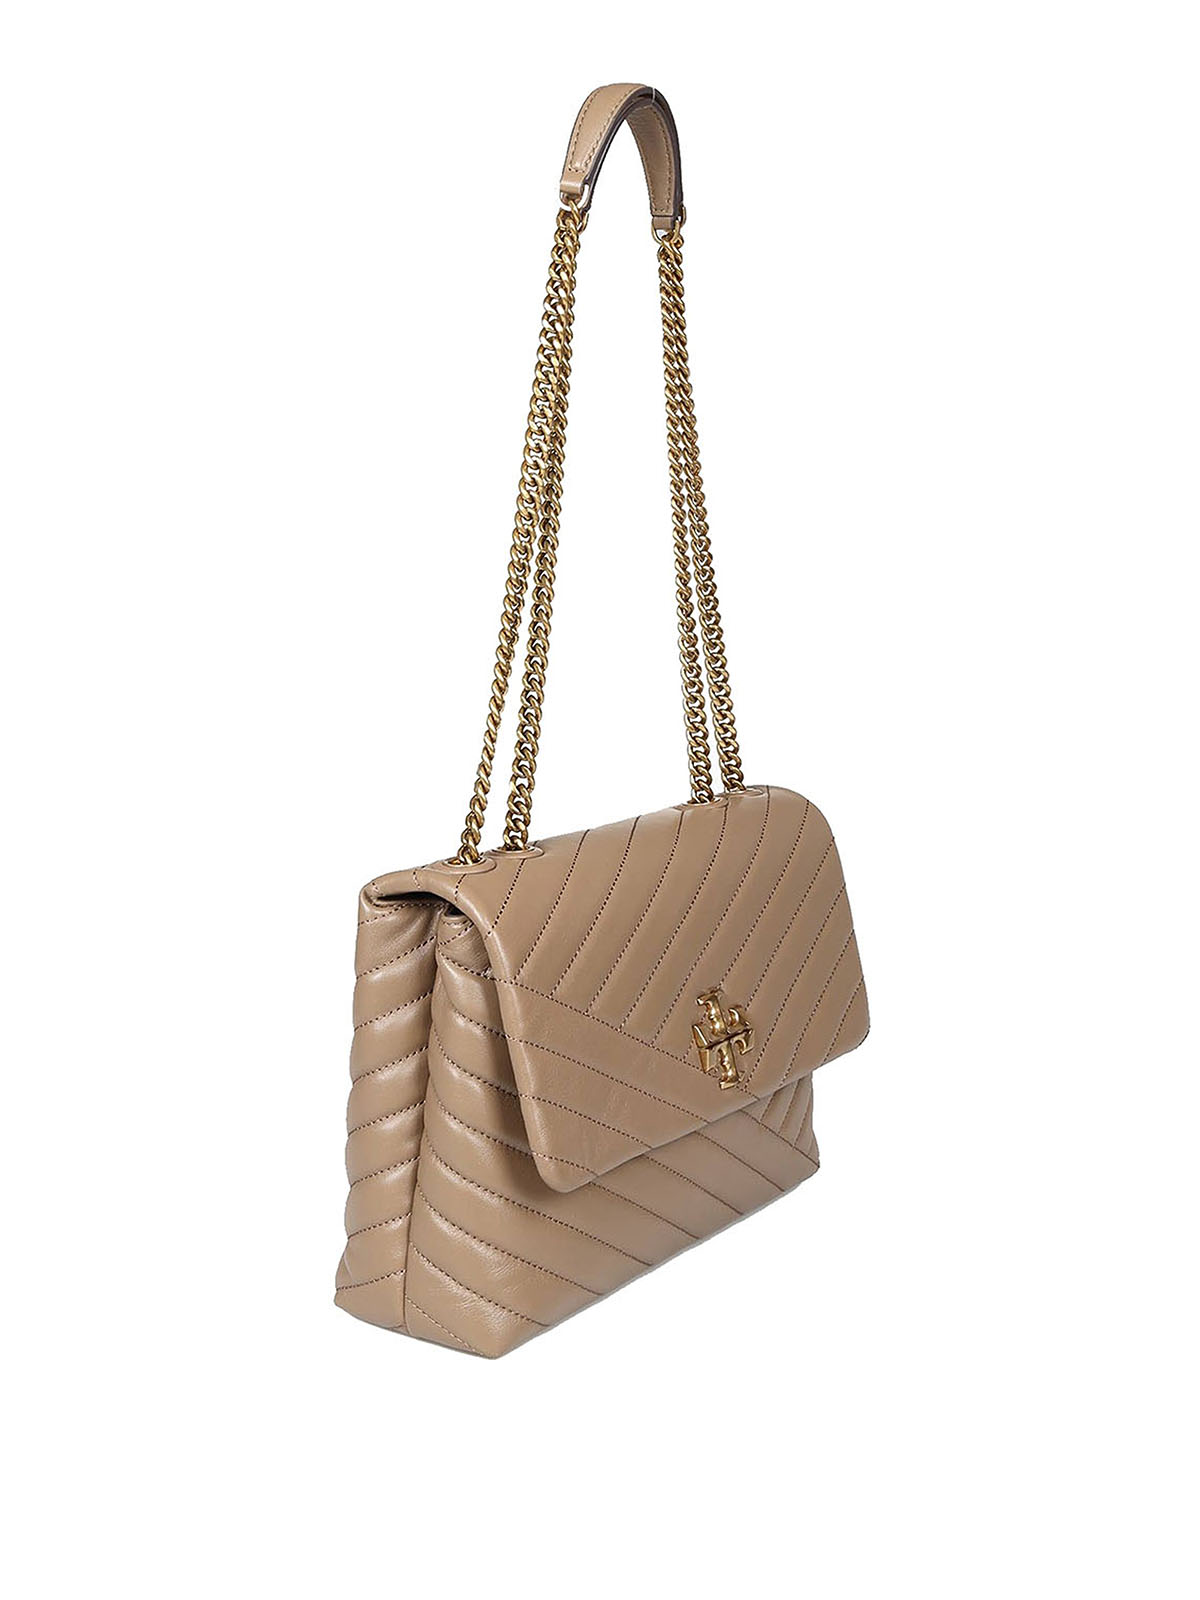 Cross body bags Tory Burch - Kira shoulder bag in sand color leather -  90446250